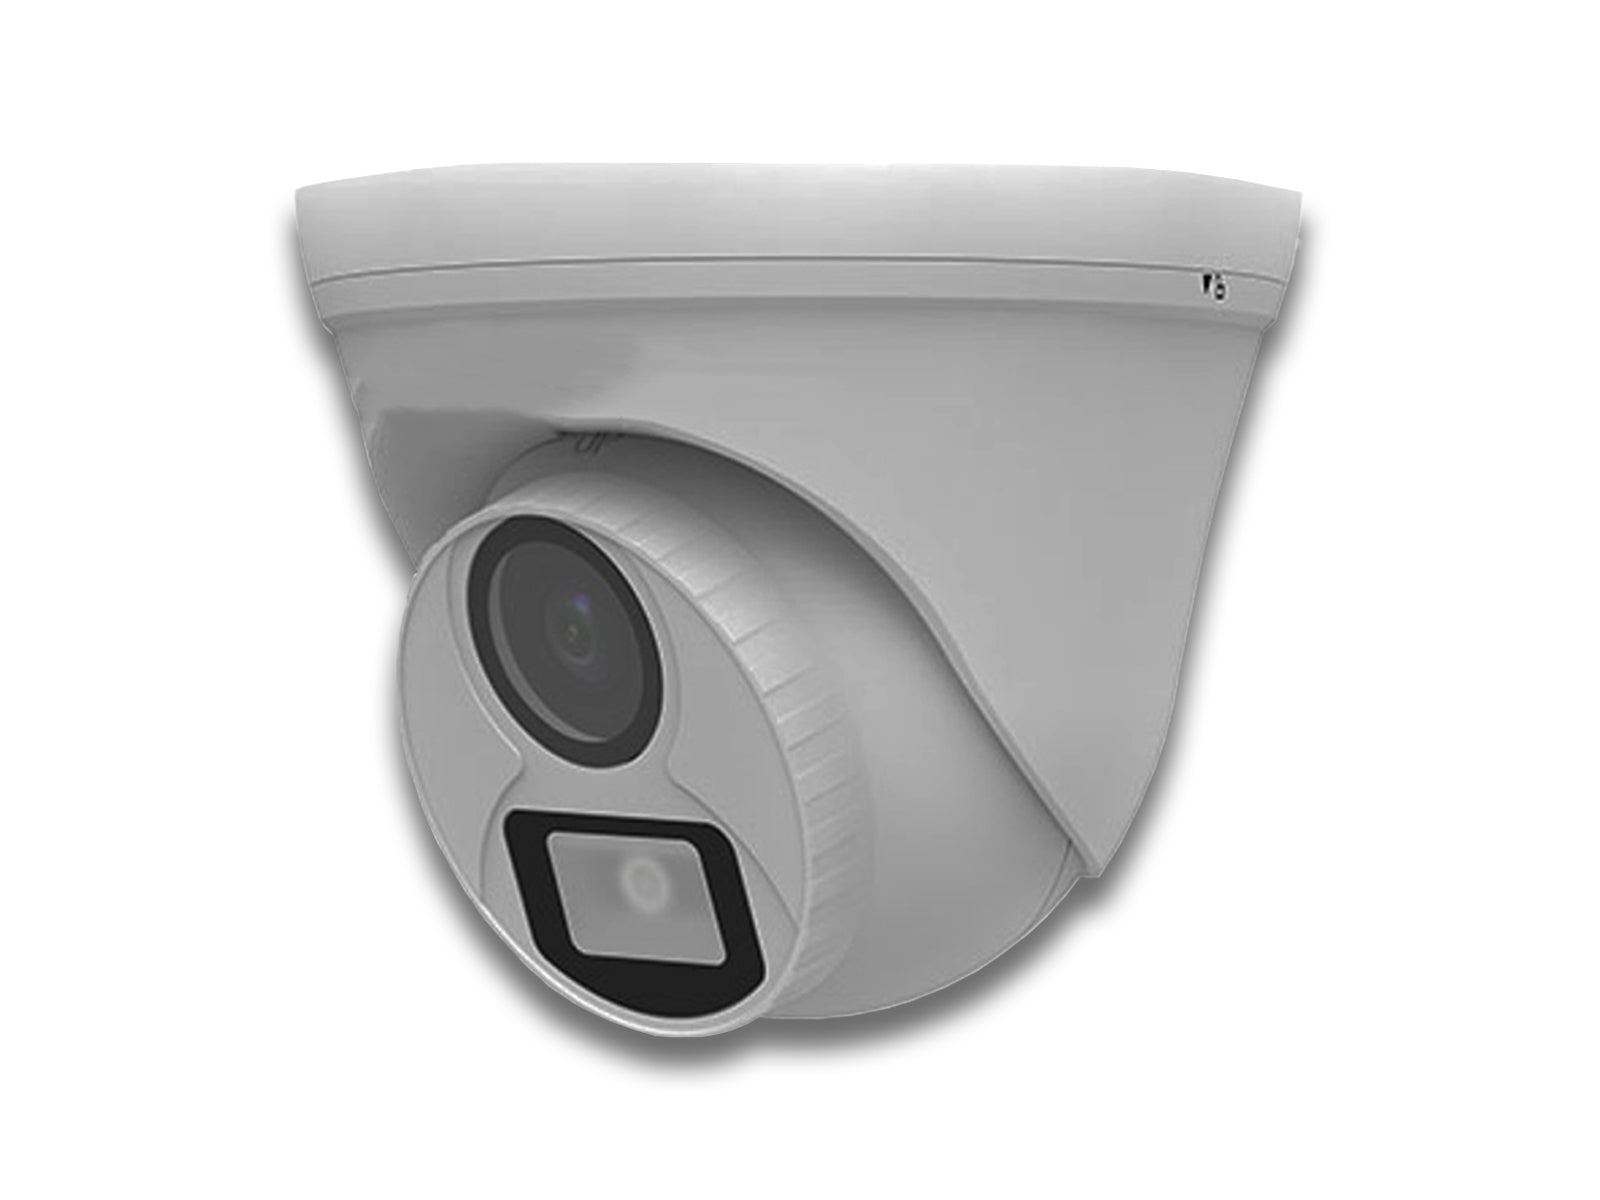 Uniarch 2mp Dome Camera Left Side View on The White Background